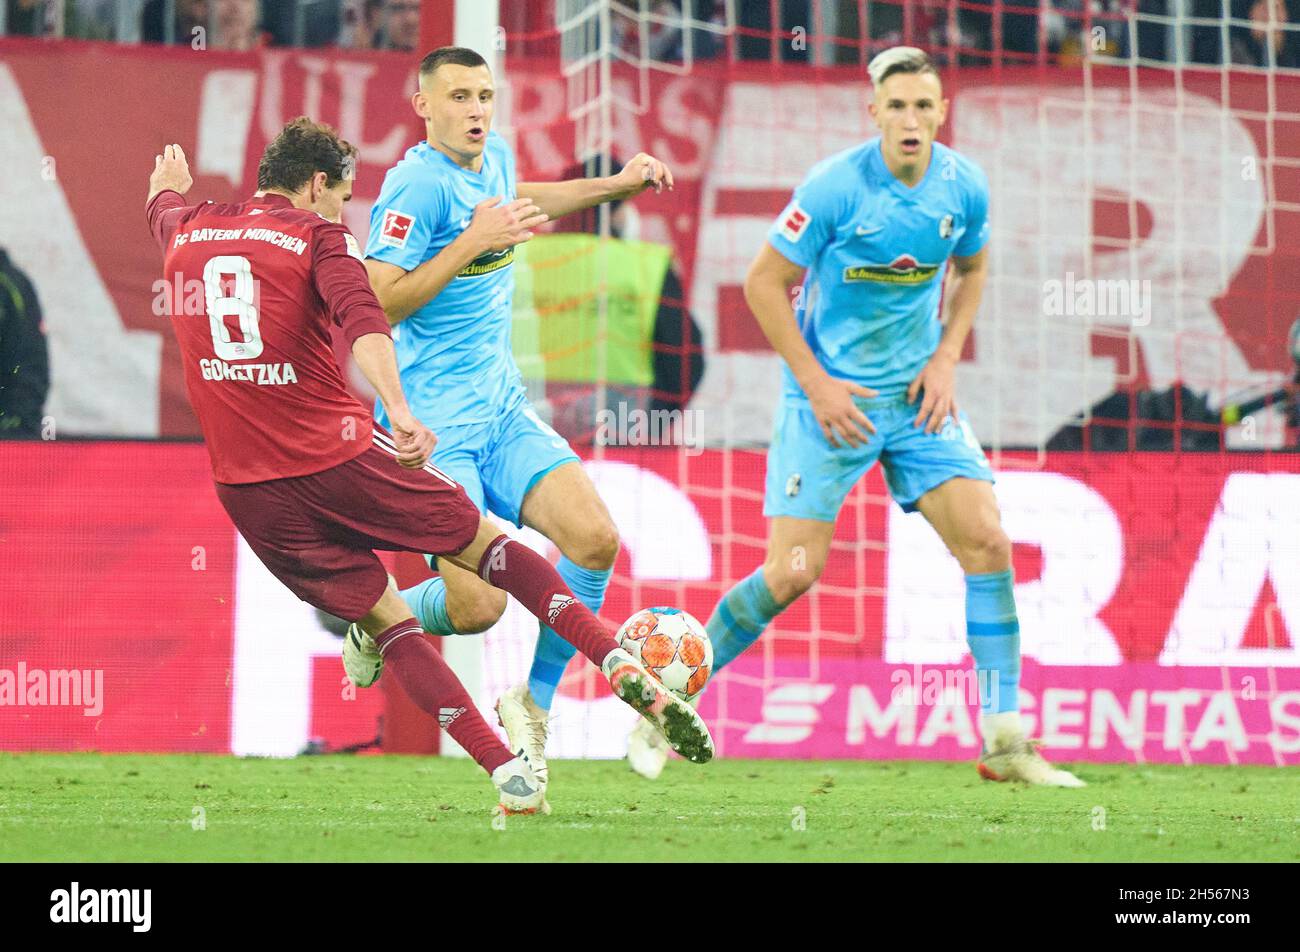 Leon GORETZKA, FCB 8  compete for the ball, tackling, duel, header, zweikampf, action, fight against Maximilian Eggestein, FRG 8 Nico Schlotterbeck, FRG 4  in the match FC BAYERN MUENCHEN - SC FREIBURG 2-1 1.German Football League on November 6, 2021 in Munich, Germany. Season 2021/2022, matchday 11, 1.Bundesliga, FCB, München, 11.Spieltag. © Peter Schatz / Alamy Live News    - DFL REGULATIONS PROHIBIT ANY USE OF PHOTOGRAPHS as IMAGE SEQUENCES and/or QUASI-VIDEO - Stock Photo